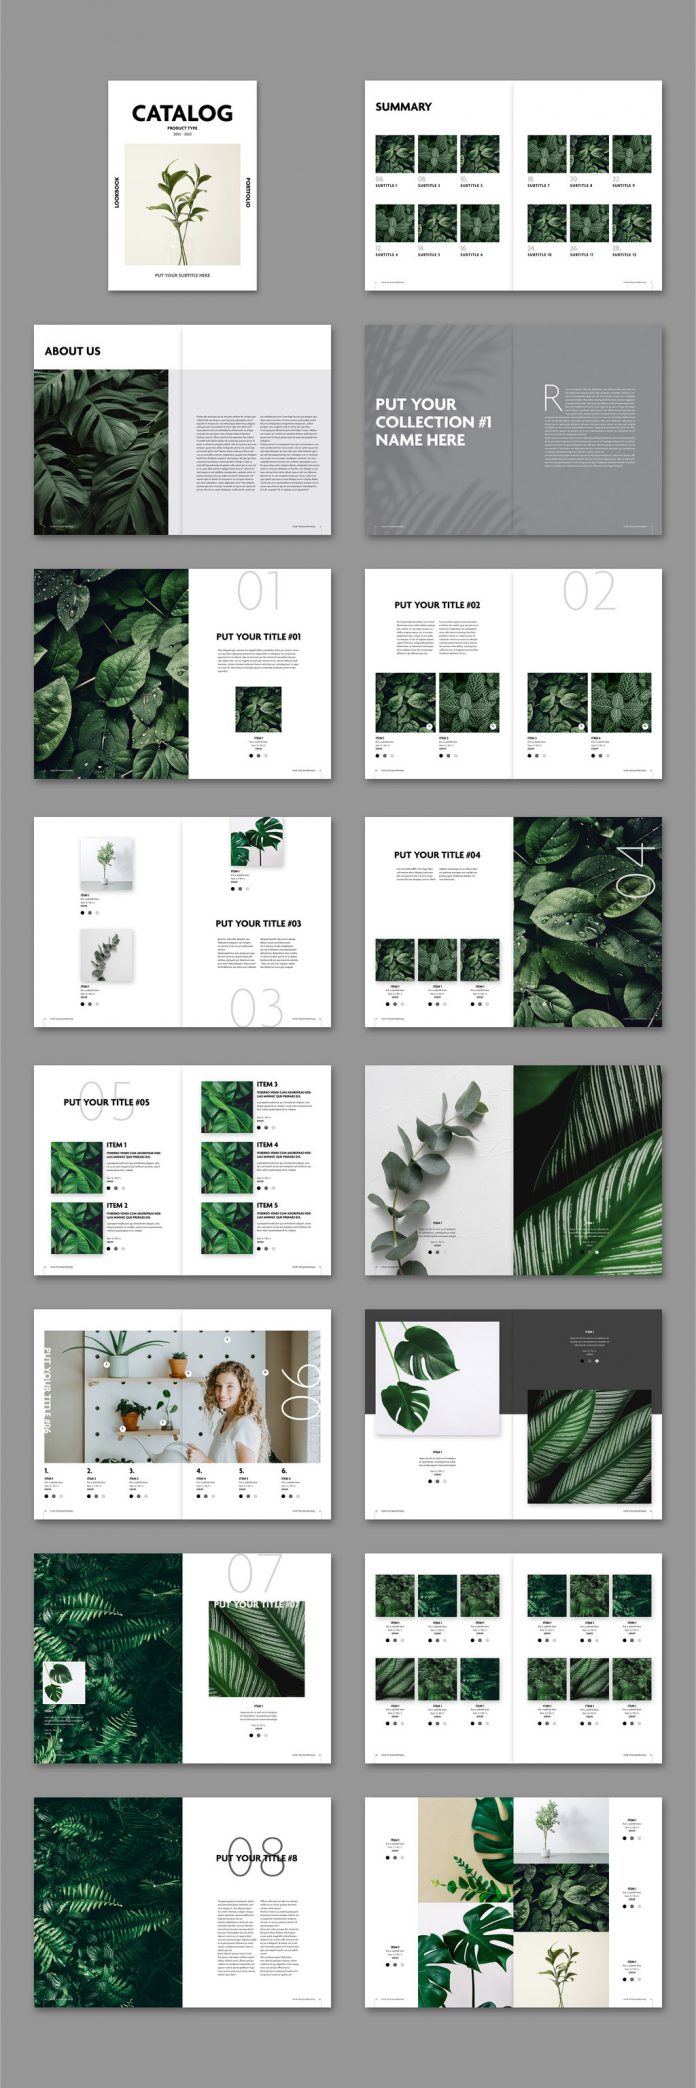 Catalog Adobe InDesign Template with 32 Pages LaptrinhX / News